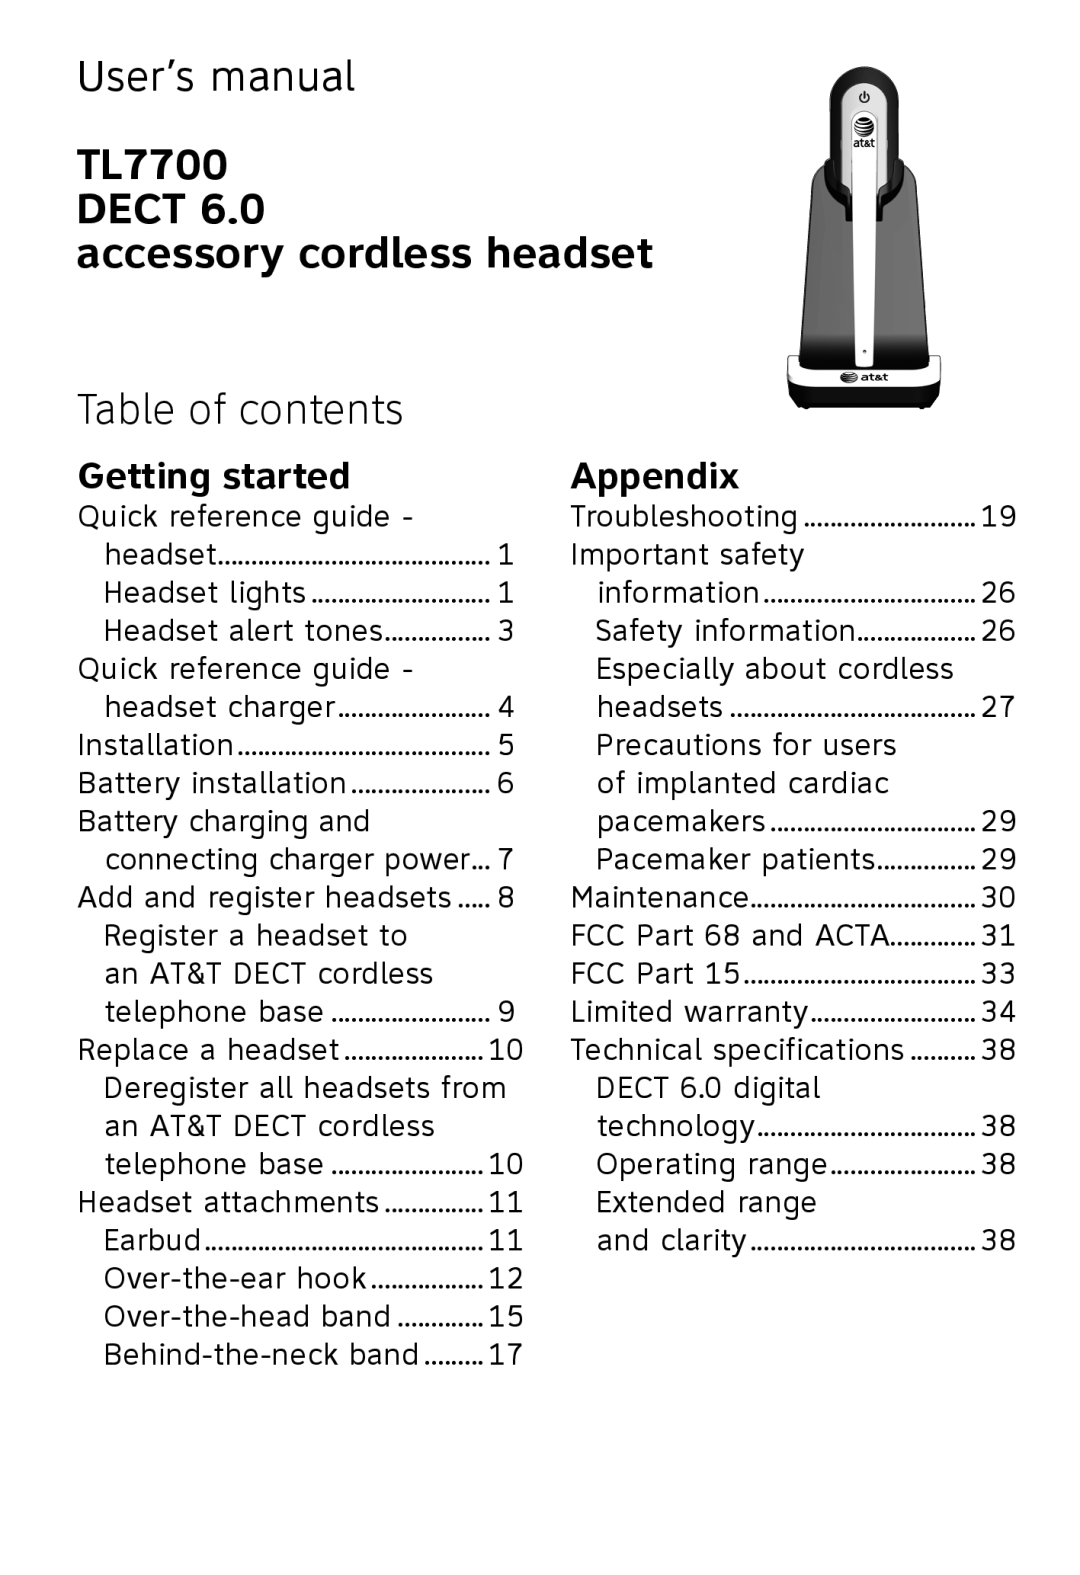 AT&T user manual Table of contents, Getting started, Appendix, TL7700 DECT accessory cordless headset 